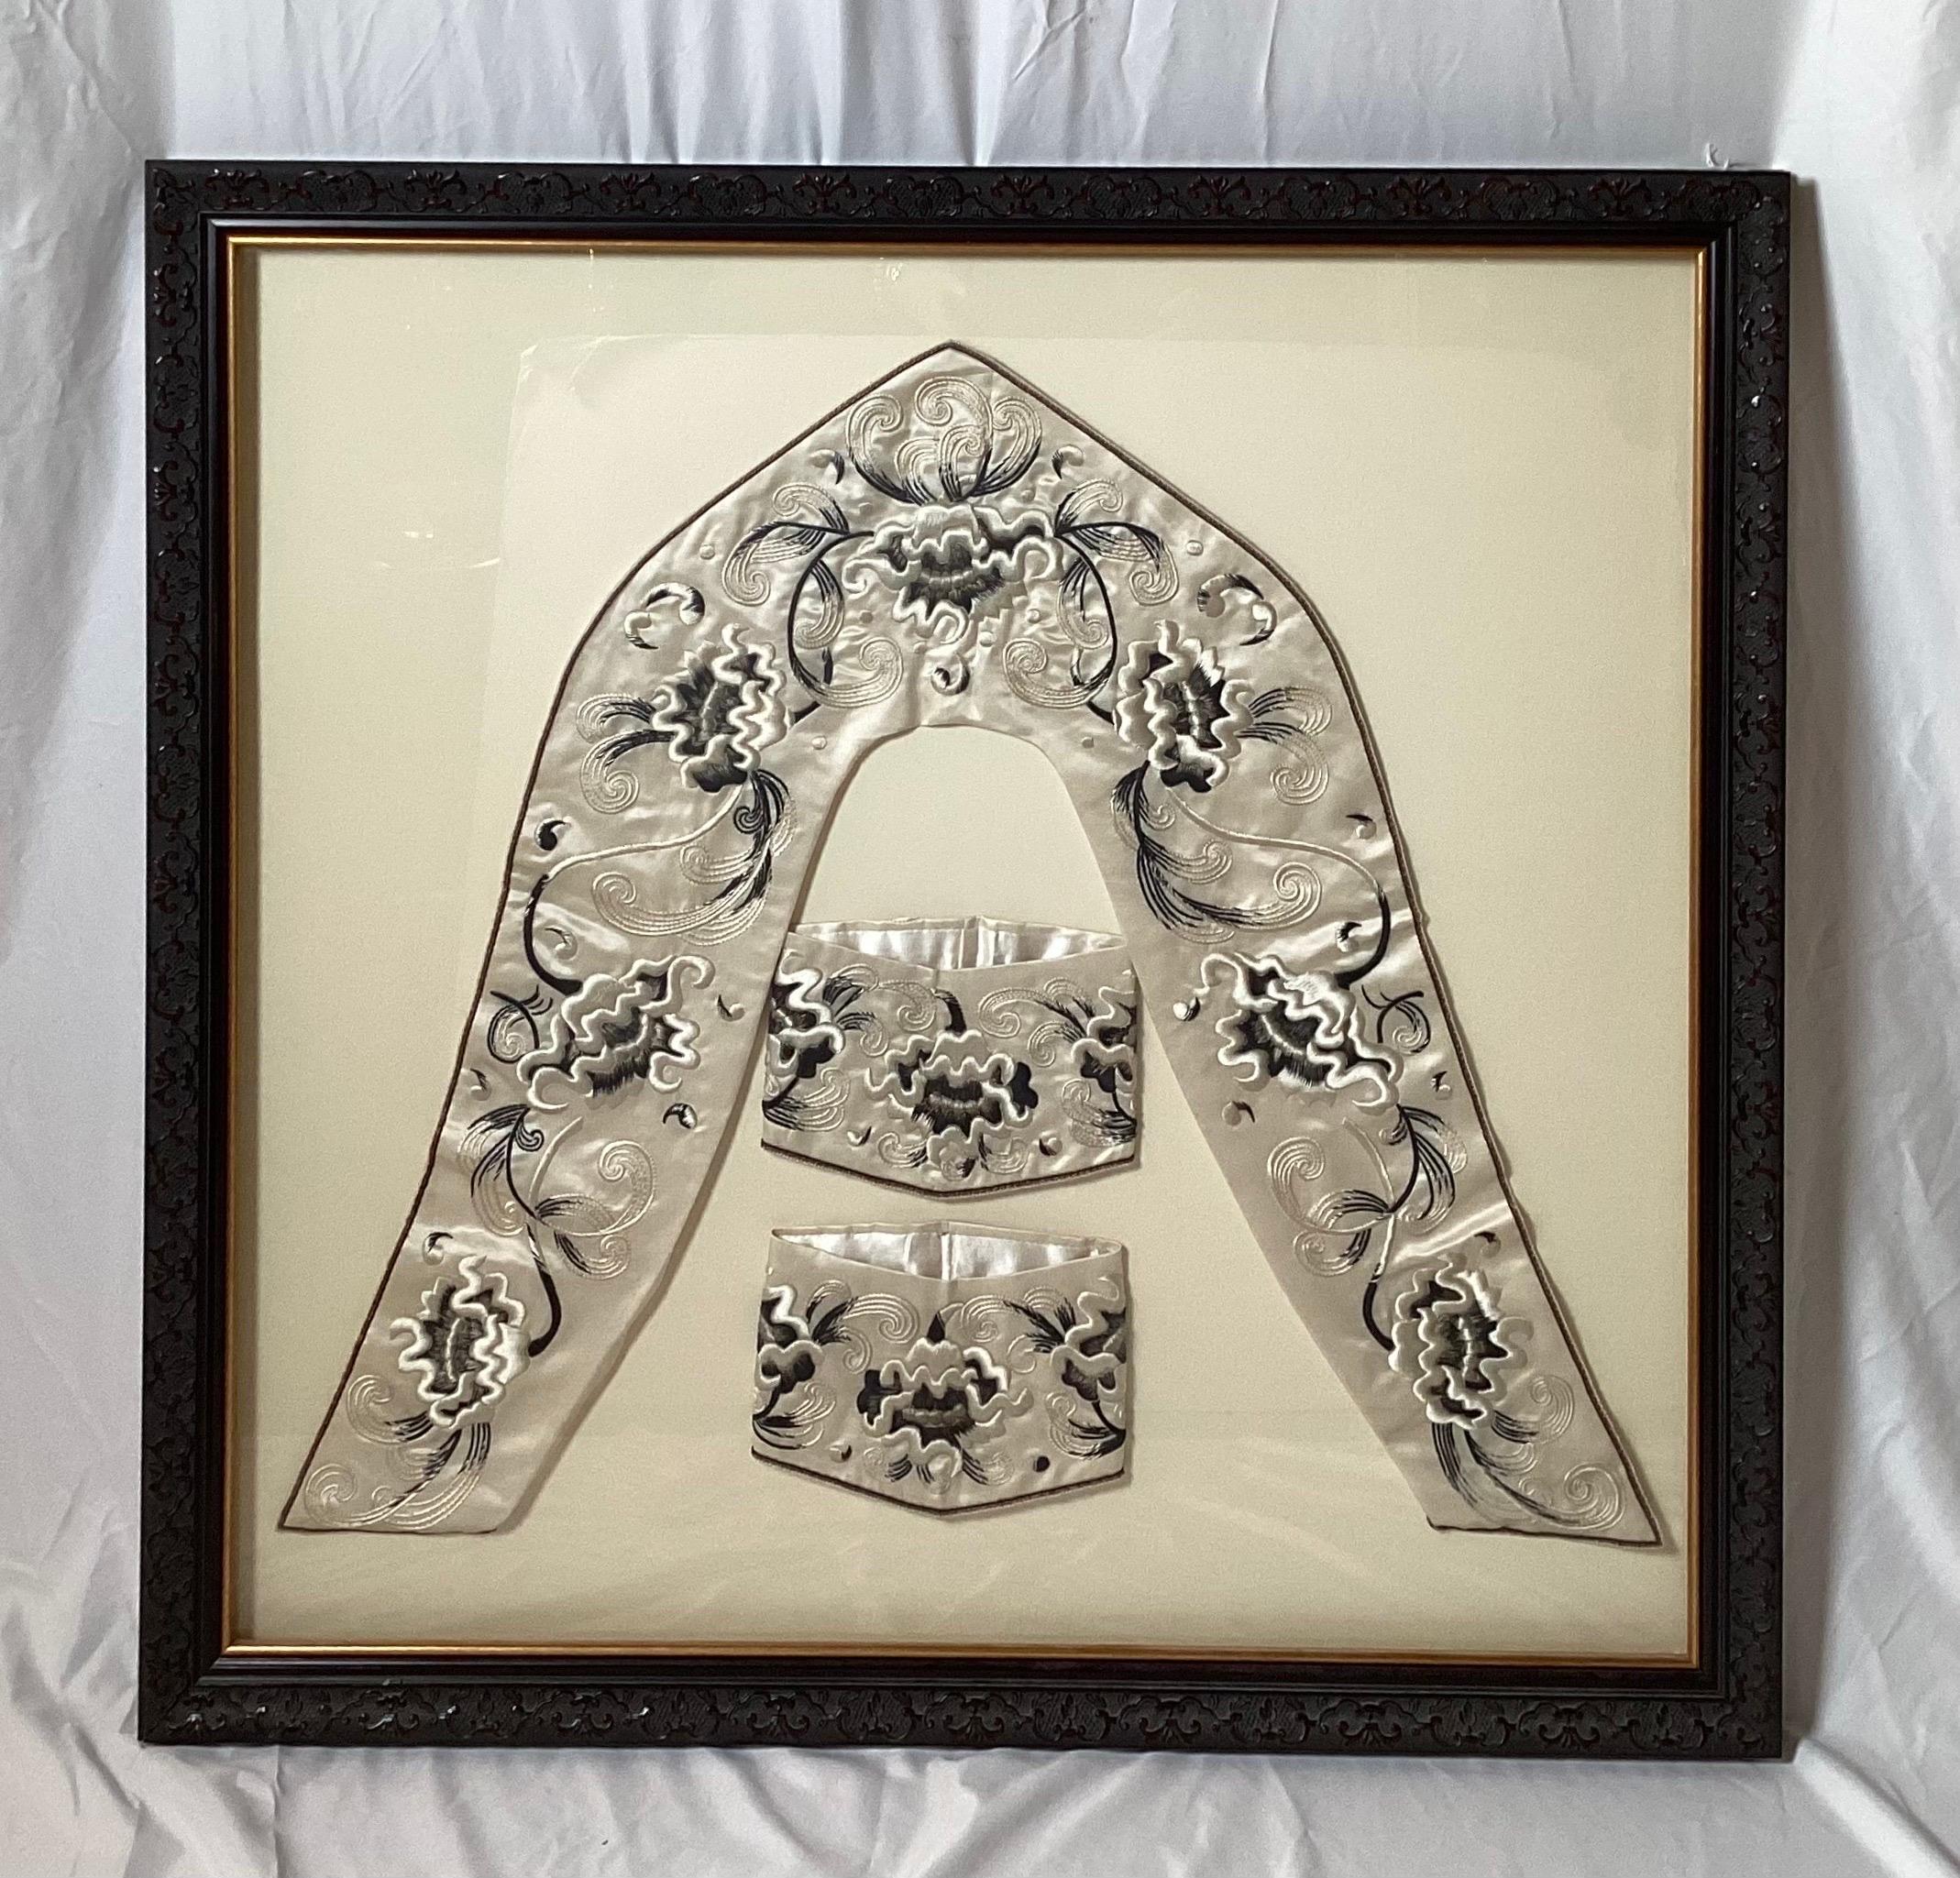 A beautifully framed set of hand embroidered silk vestments. The sash-collar and cuffs in a floral black and off white palette on a white silk background. The frame with a beautiful carved Hung Mu wood frame.